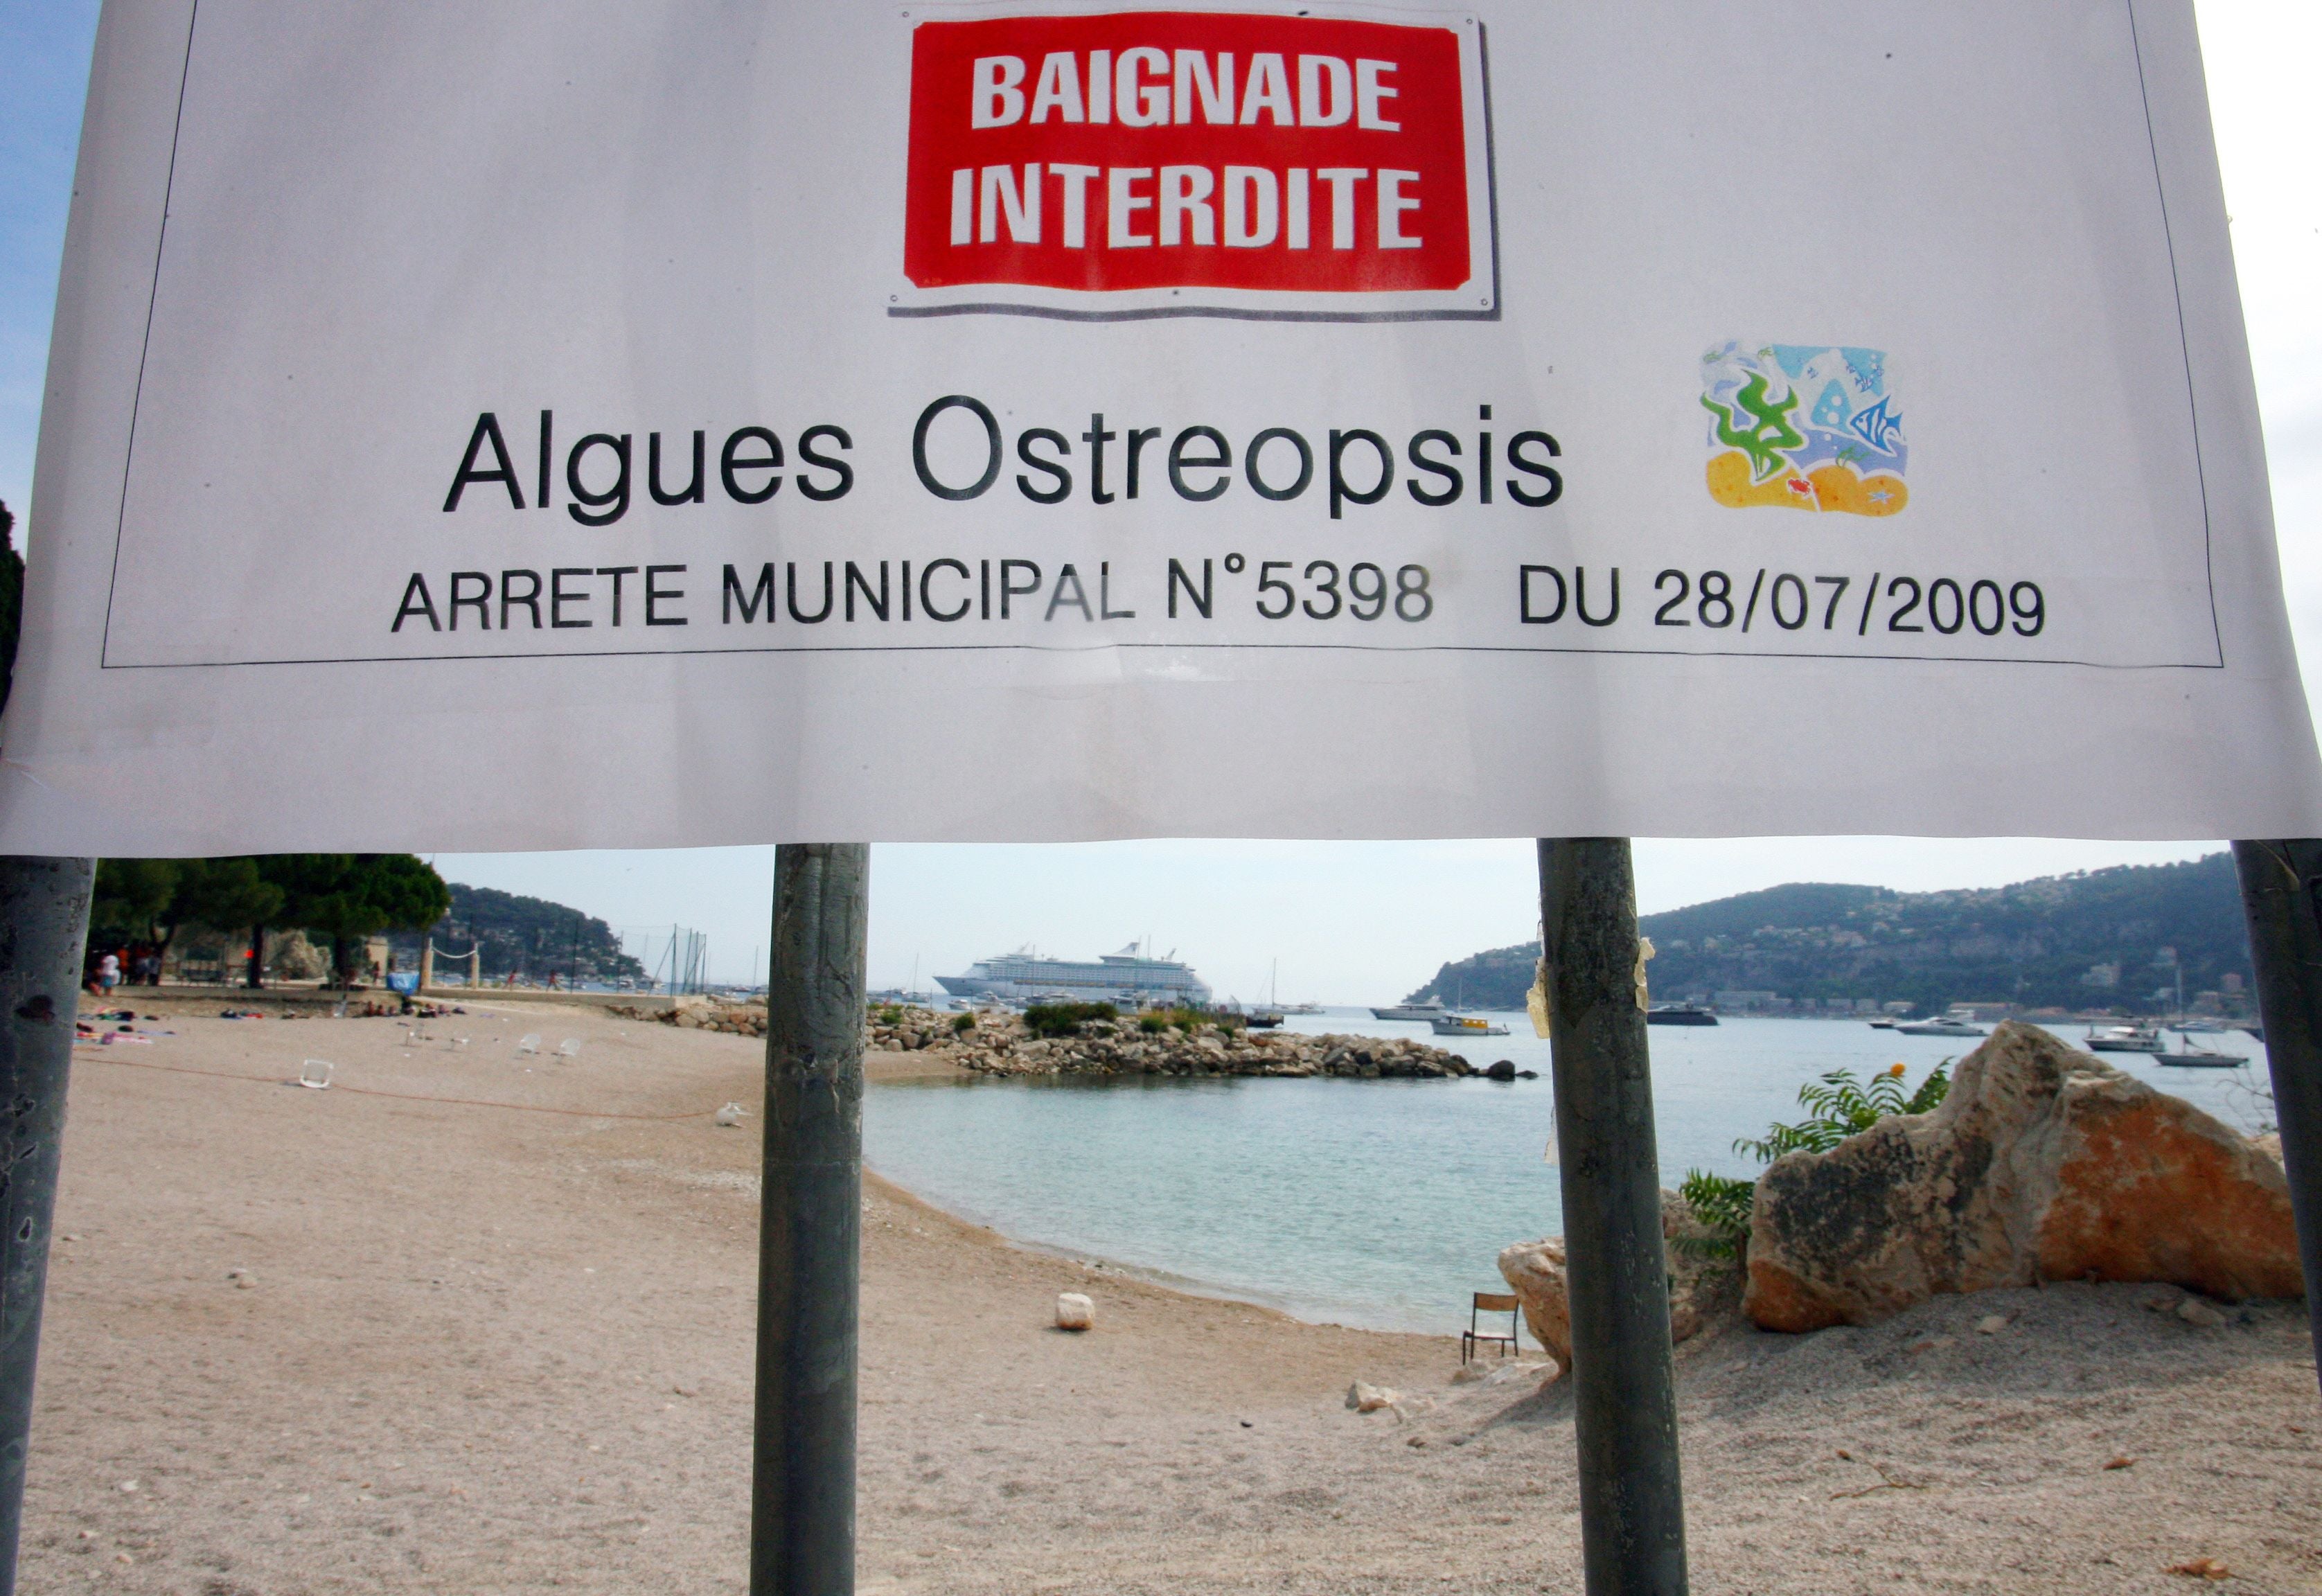 France banned swimming at beaches on the Cote d’Azur in 2009 due to the toxic algae